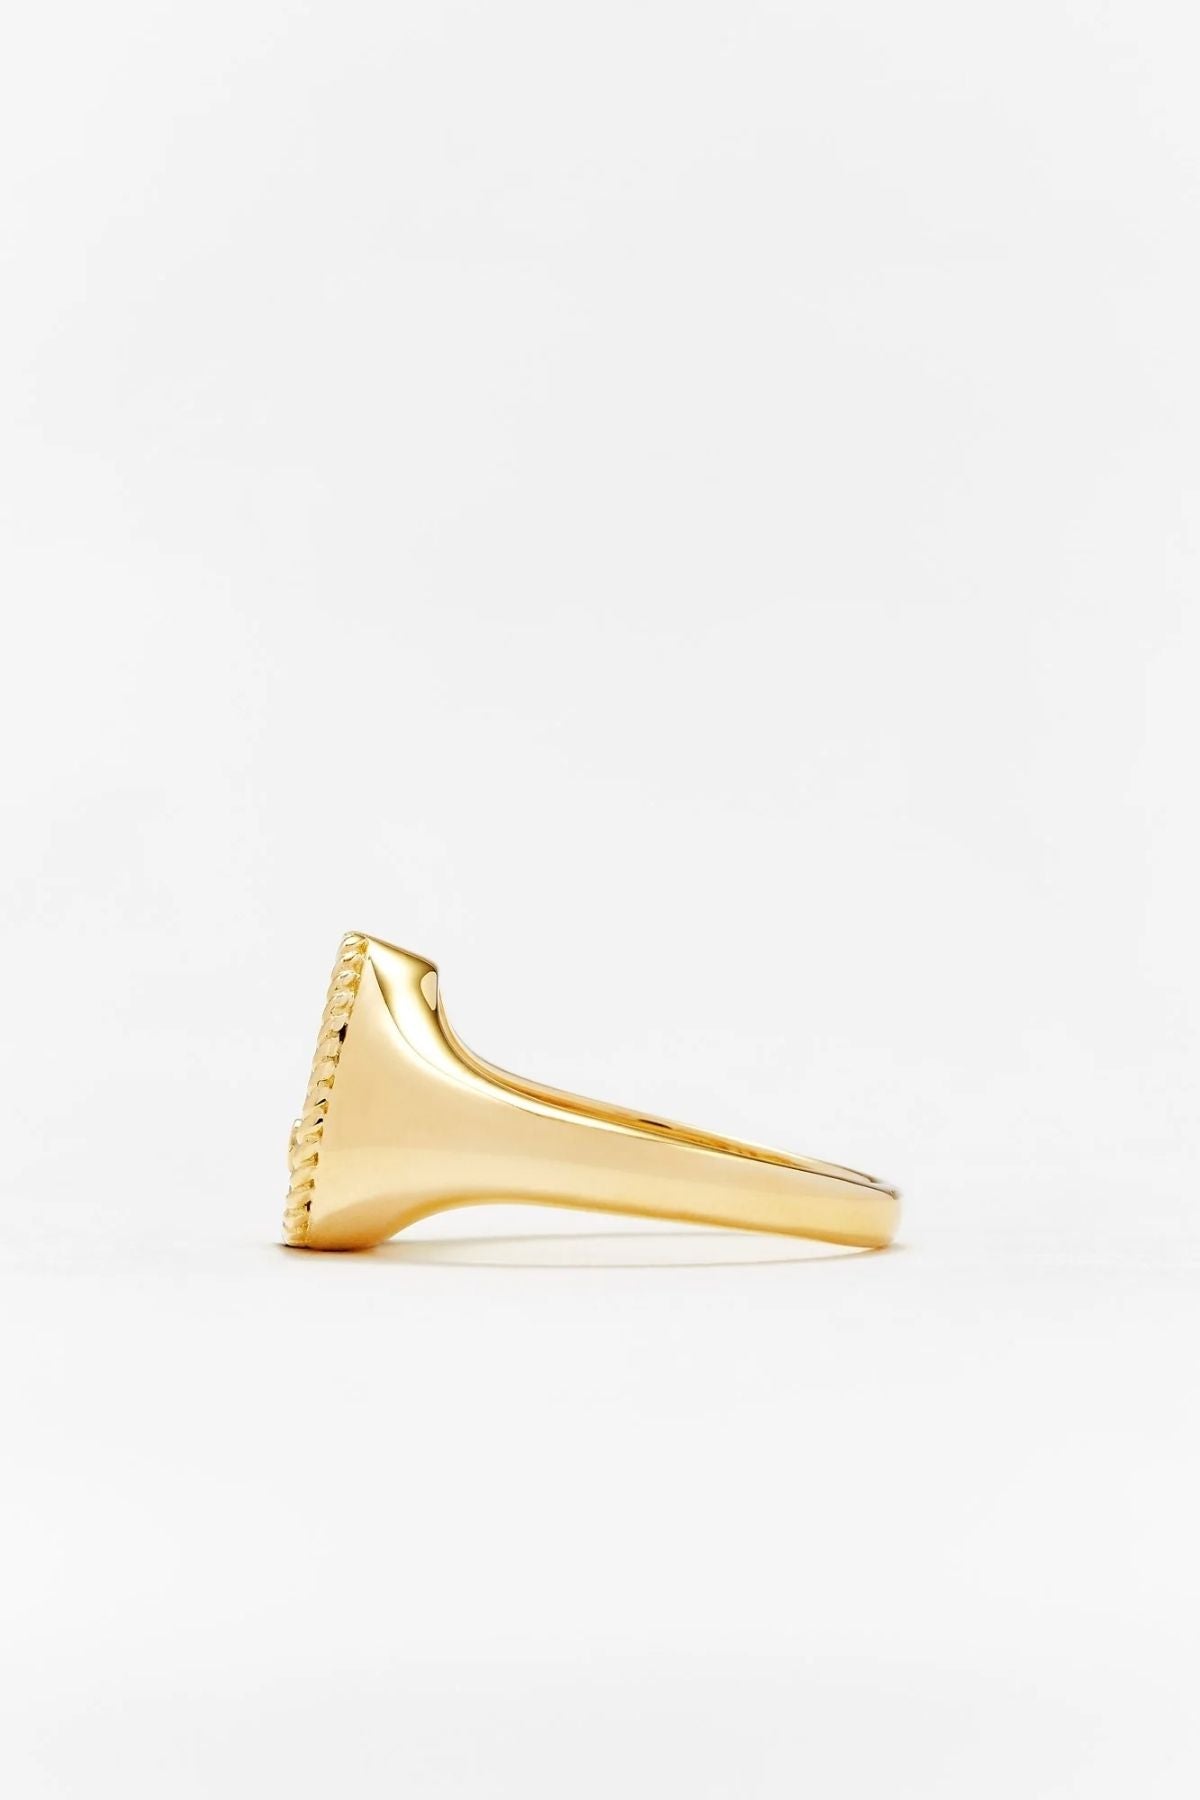 Yvonne Léon Baby Chevaliere Pear Ring - Yellow Gold